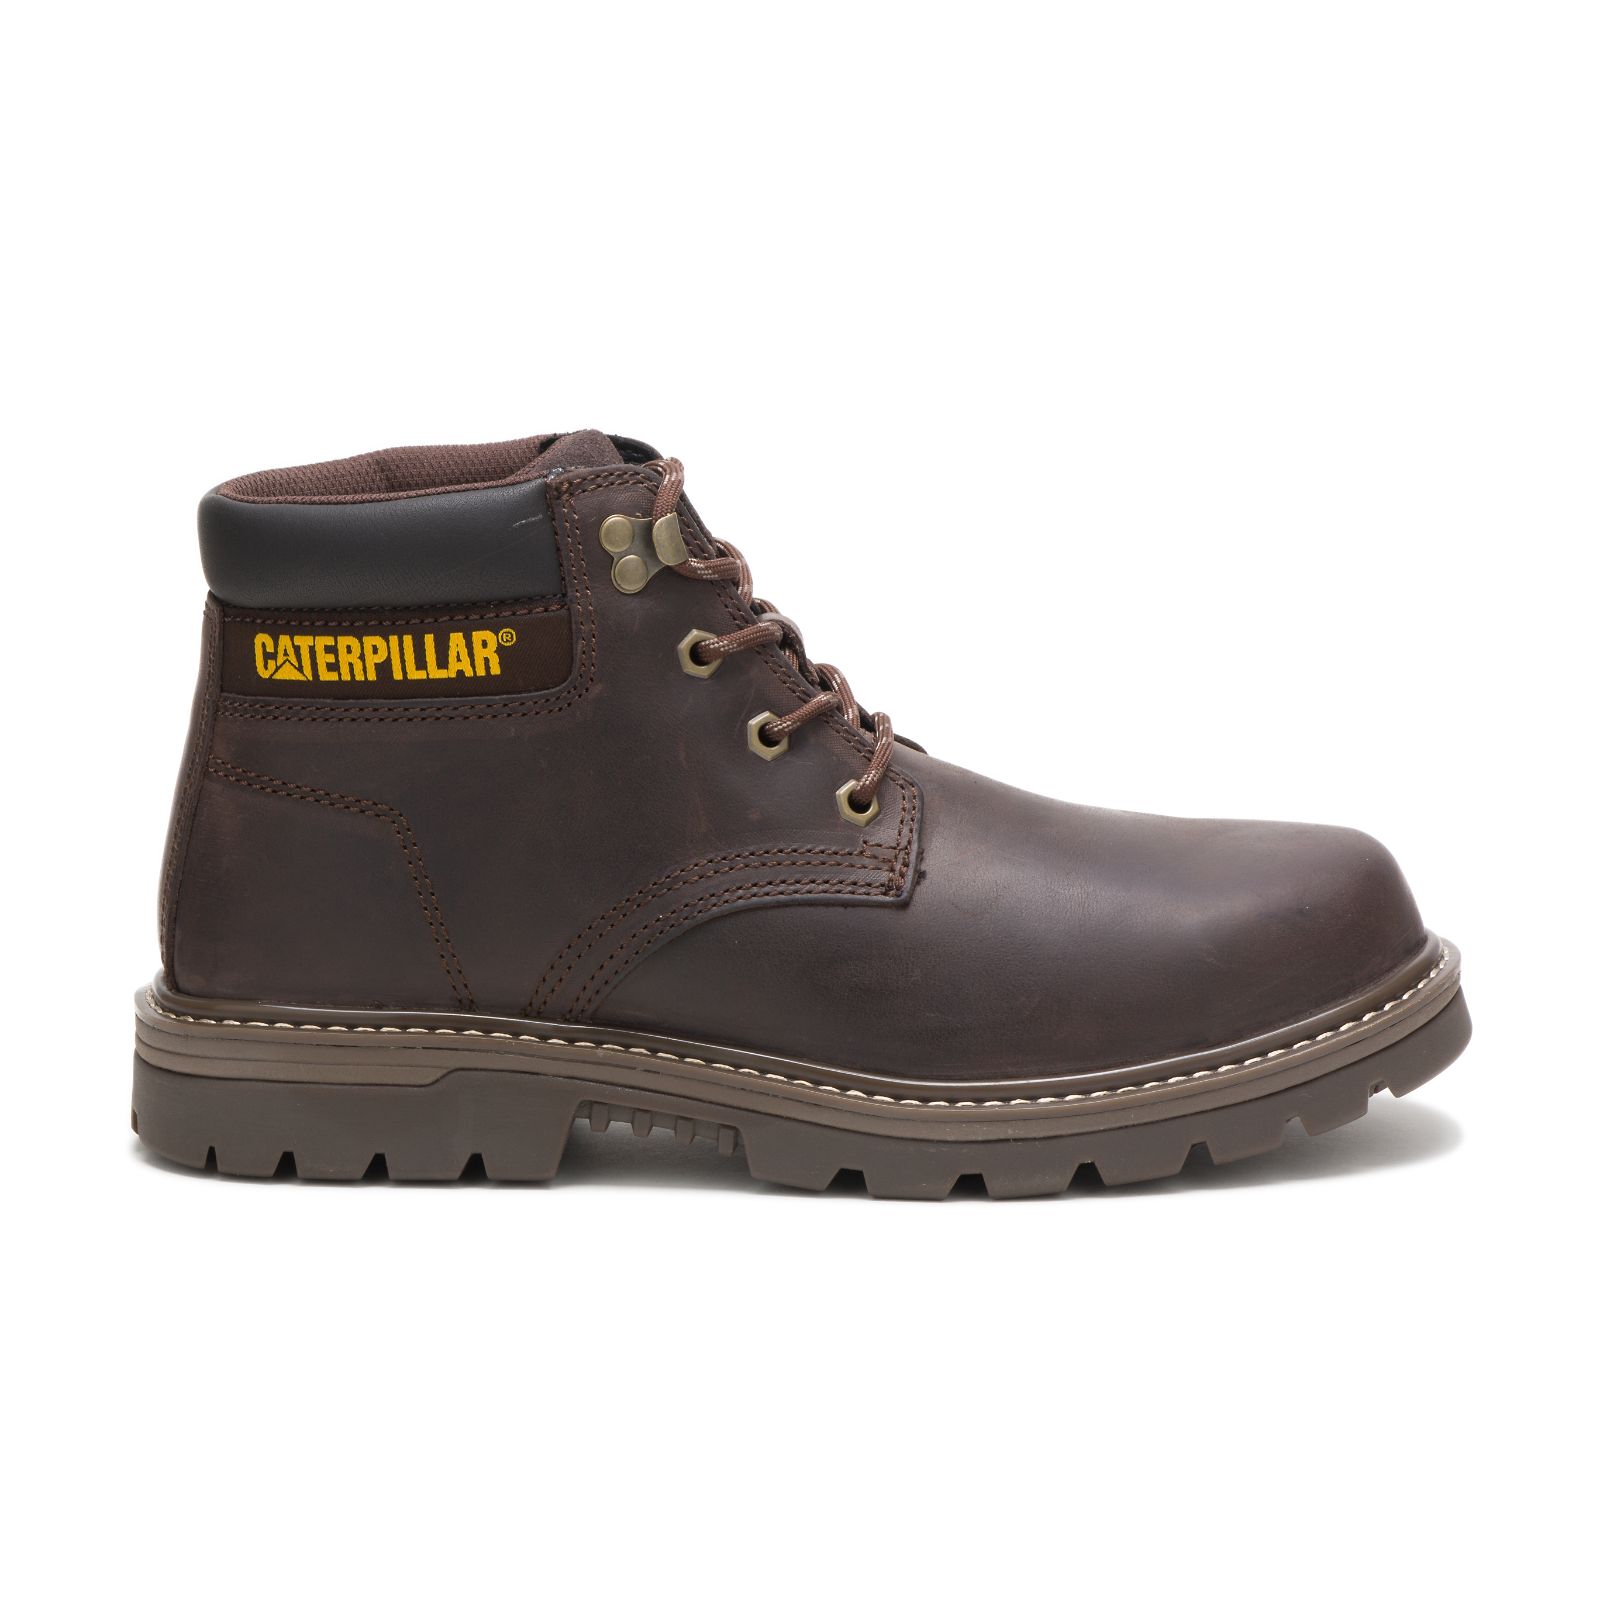 Caterpillar Outbase Steel Toe Philippines - Mens Steel Toe Boots - Coffee 75389RNMG